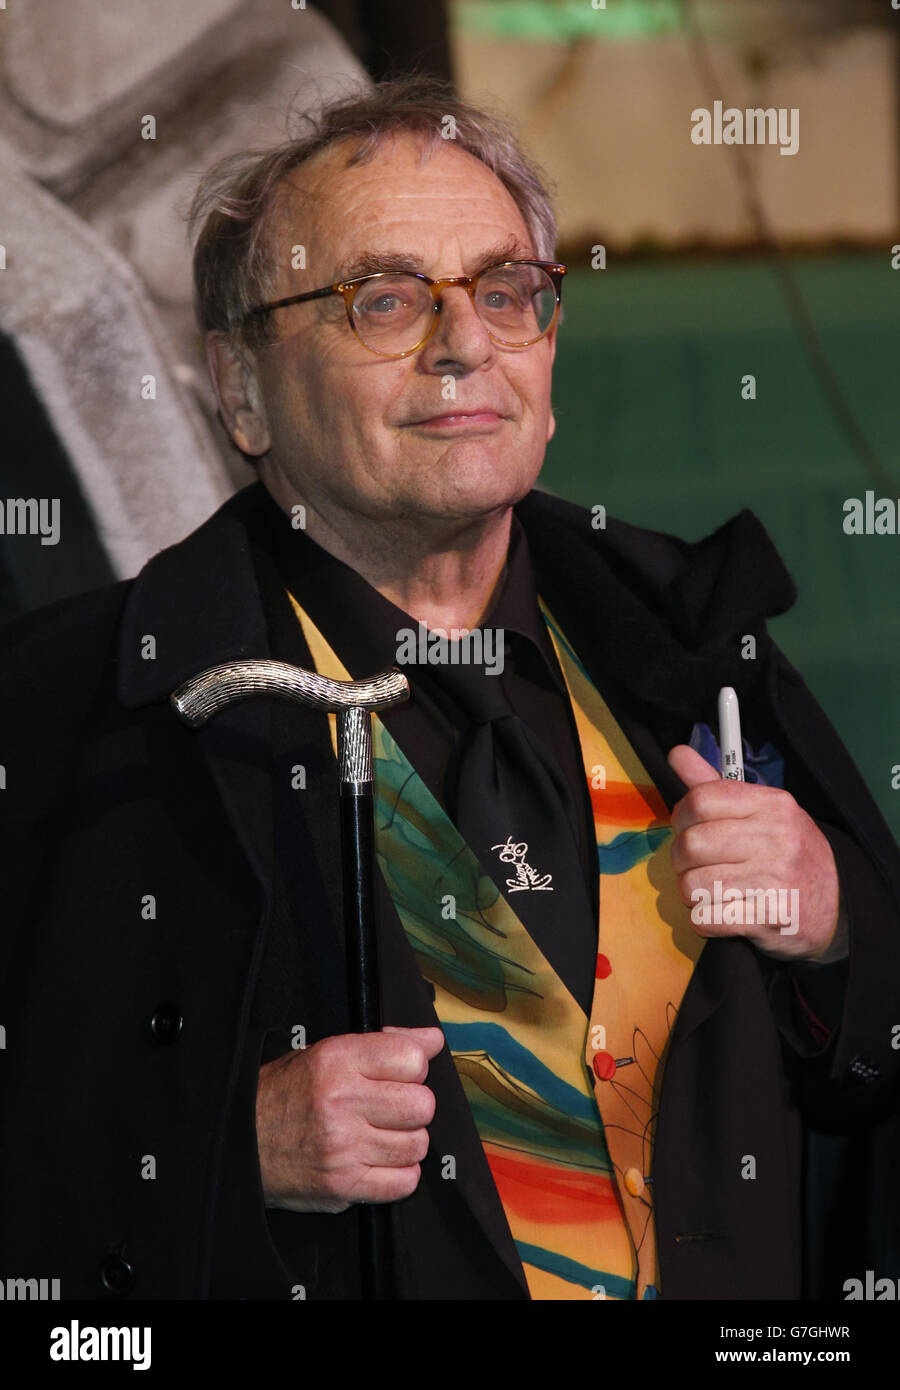 Sylvester McCoy arrives on the green carpet for the premiere of The Hobbit: Battle of the Five Armies, at the Odeon Leicester Square in central London. Stock Photo